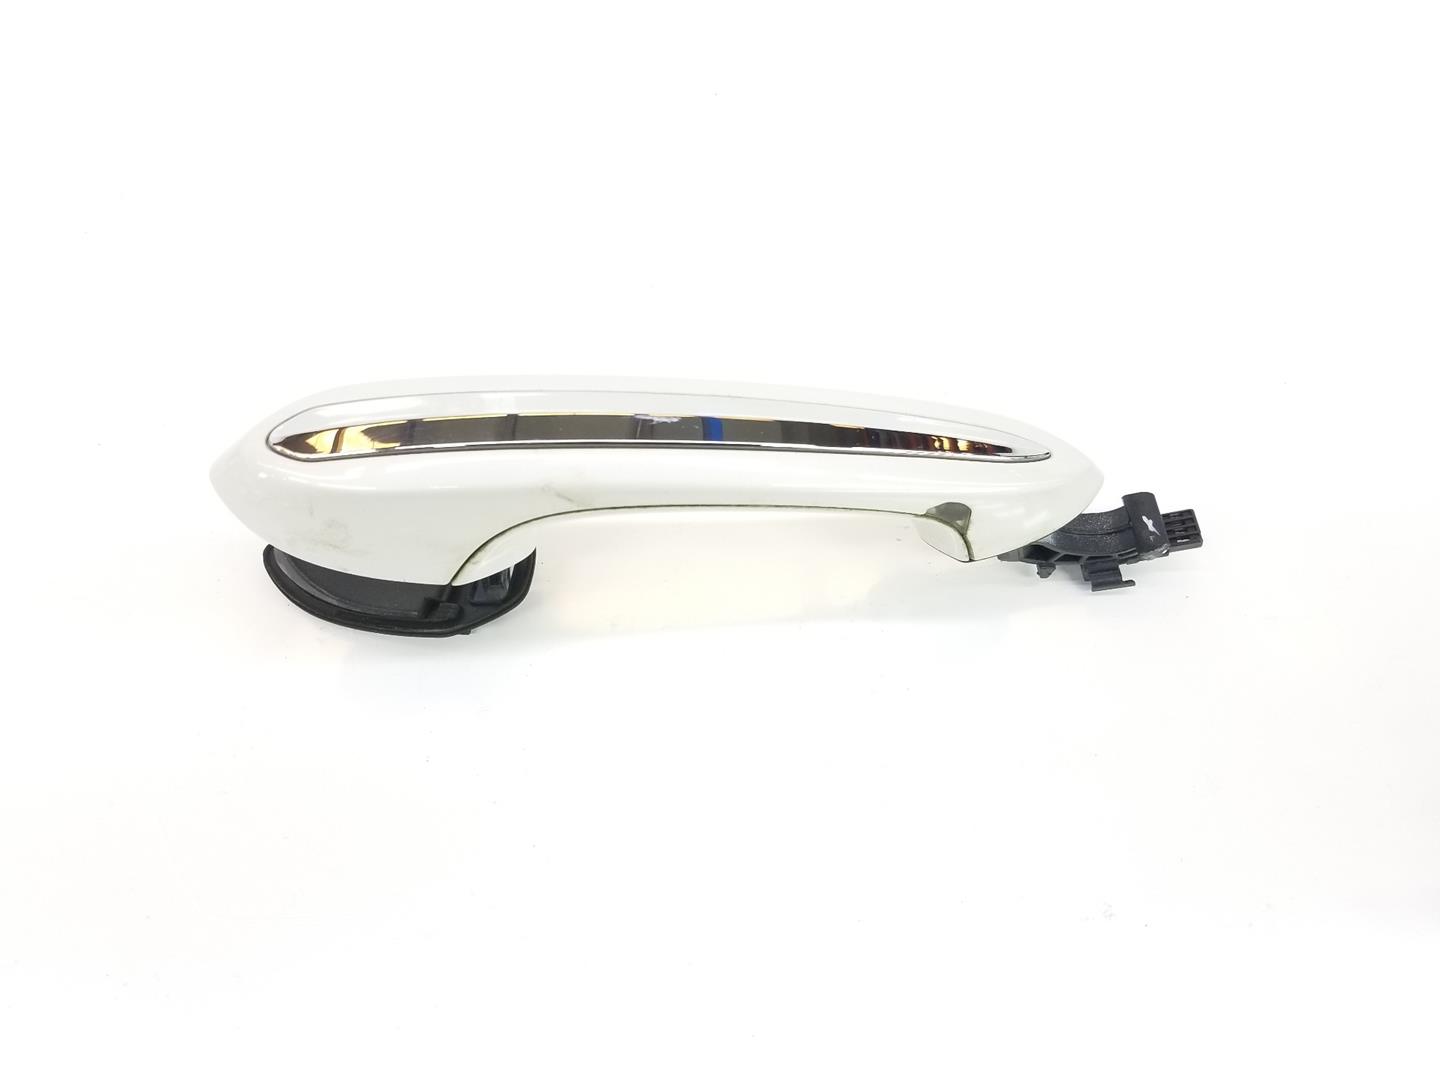 BMW 5 Series G30/G31 (2016-2023) Front Right Door Exterior Handle 51218492206, 51218492206, COLORBLANCOA96 24135009